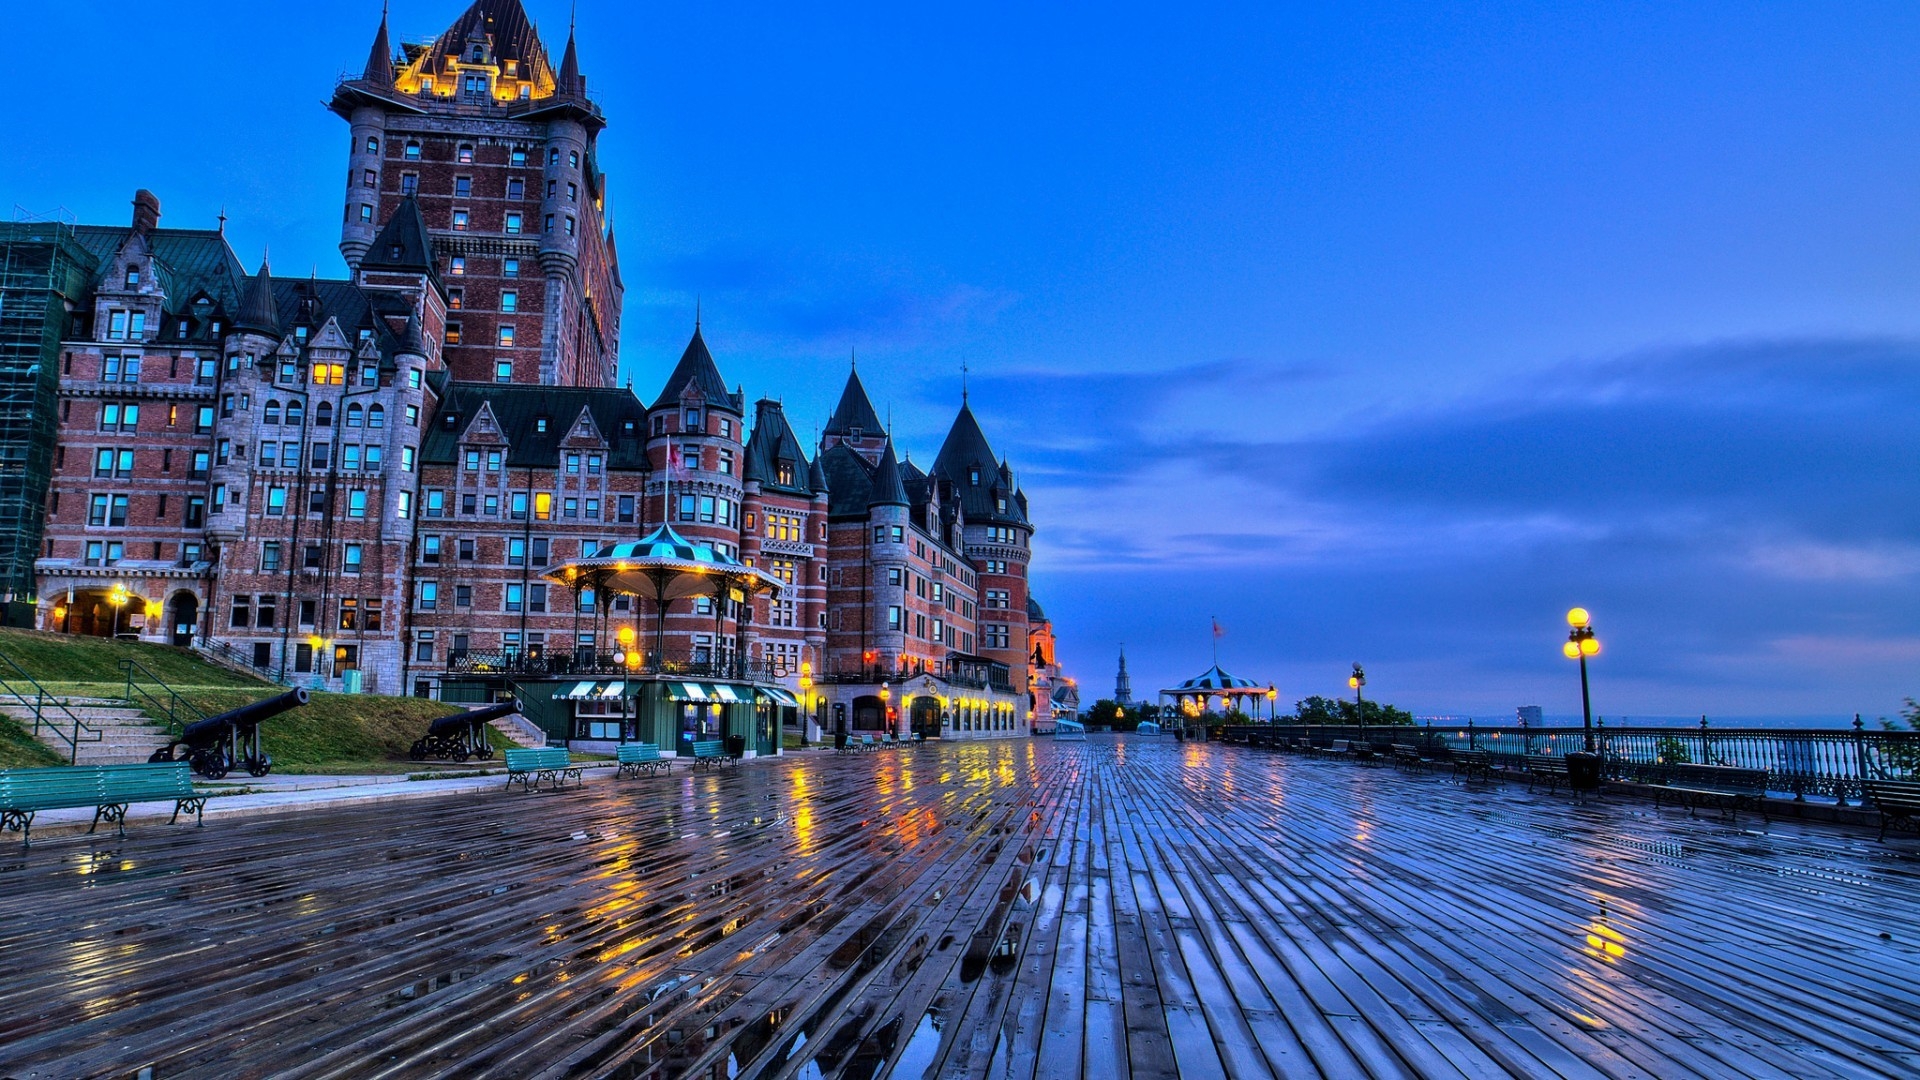 Chateau Frontenac Quebec for 1920 x 1080 HDTV 1080p resolution